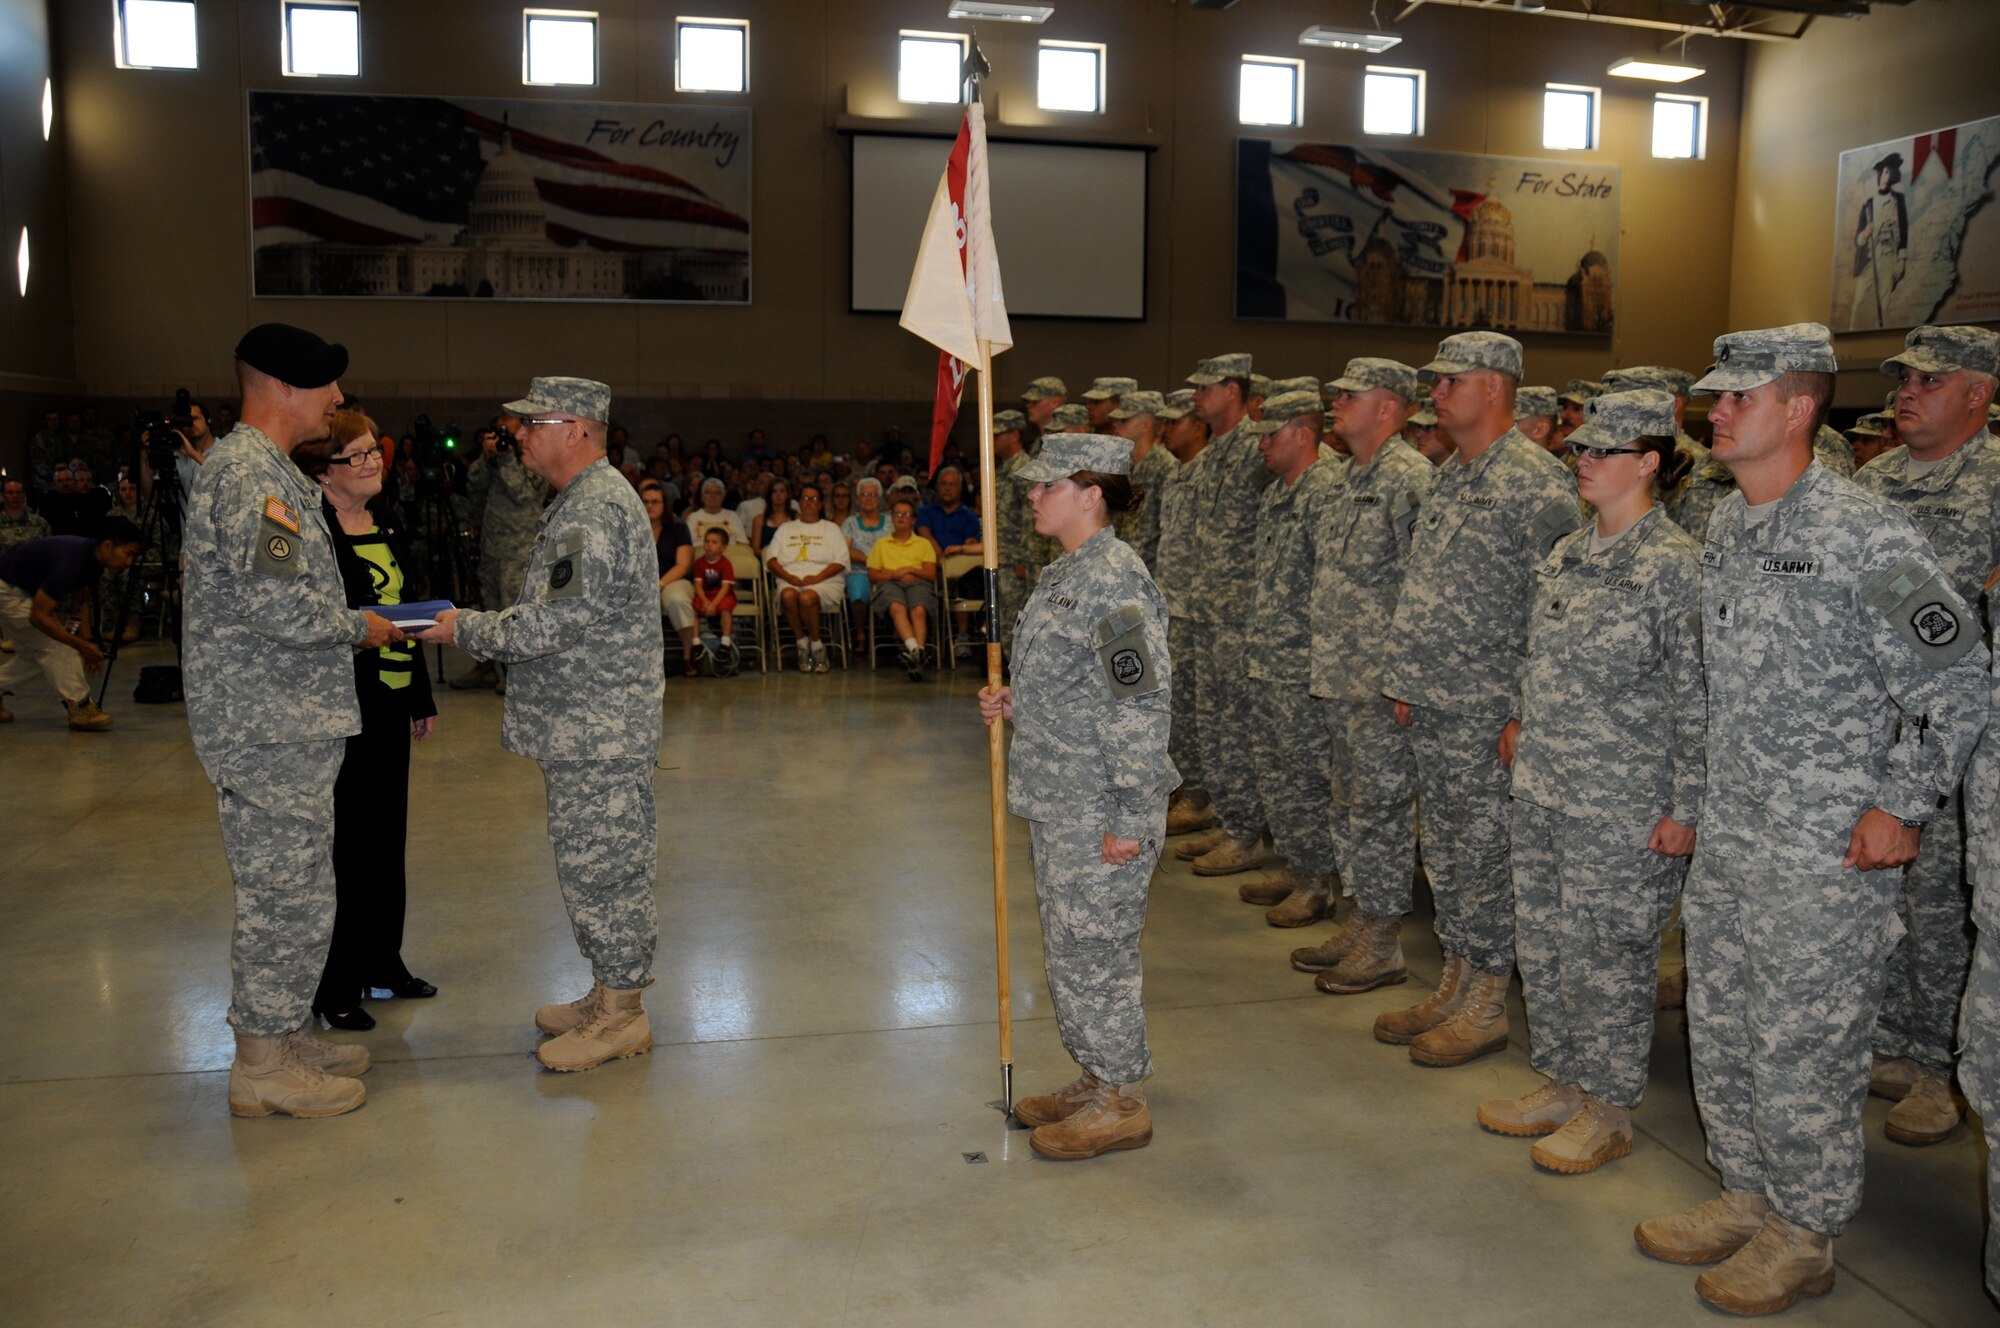 Iowa Lt. Gov. Patty Judge looks on as Iowa Adjutant General Brig. Gen. Timothy Orr presents an Iowa state flag to Col. Craig Bargfrede, 734th Agri-Business Development Team Commander, at the Team's Community Send-Off Ceremony on July 1 at Camp Dodge, Iowa. USAF Photo Capt. Peter Shinn, 734th ADT Public Affairs (Released)